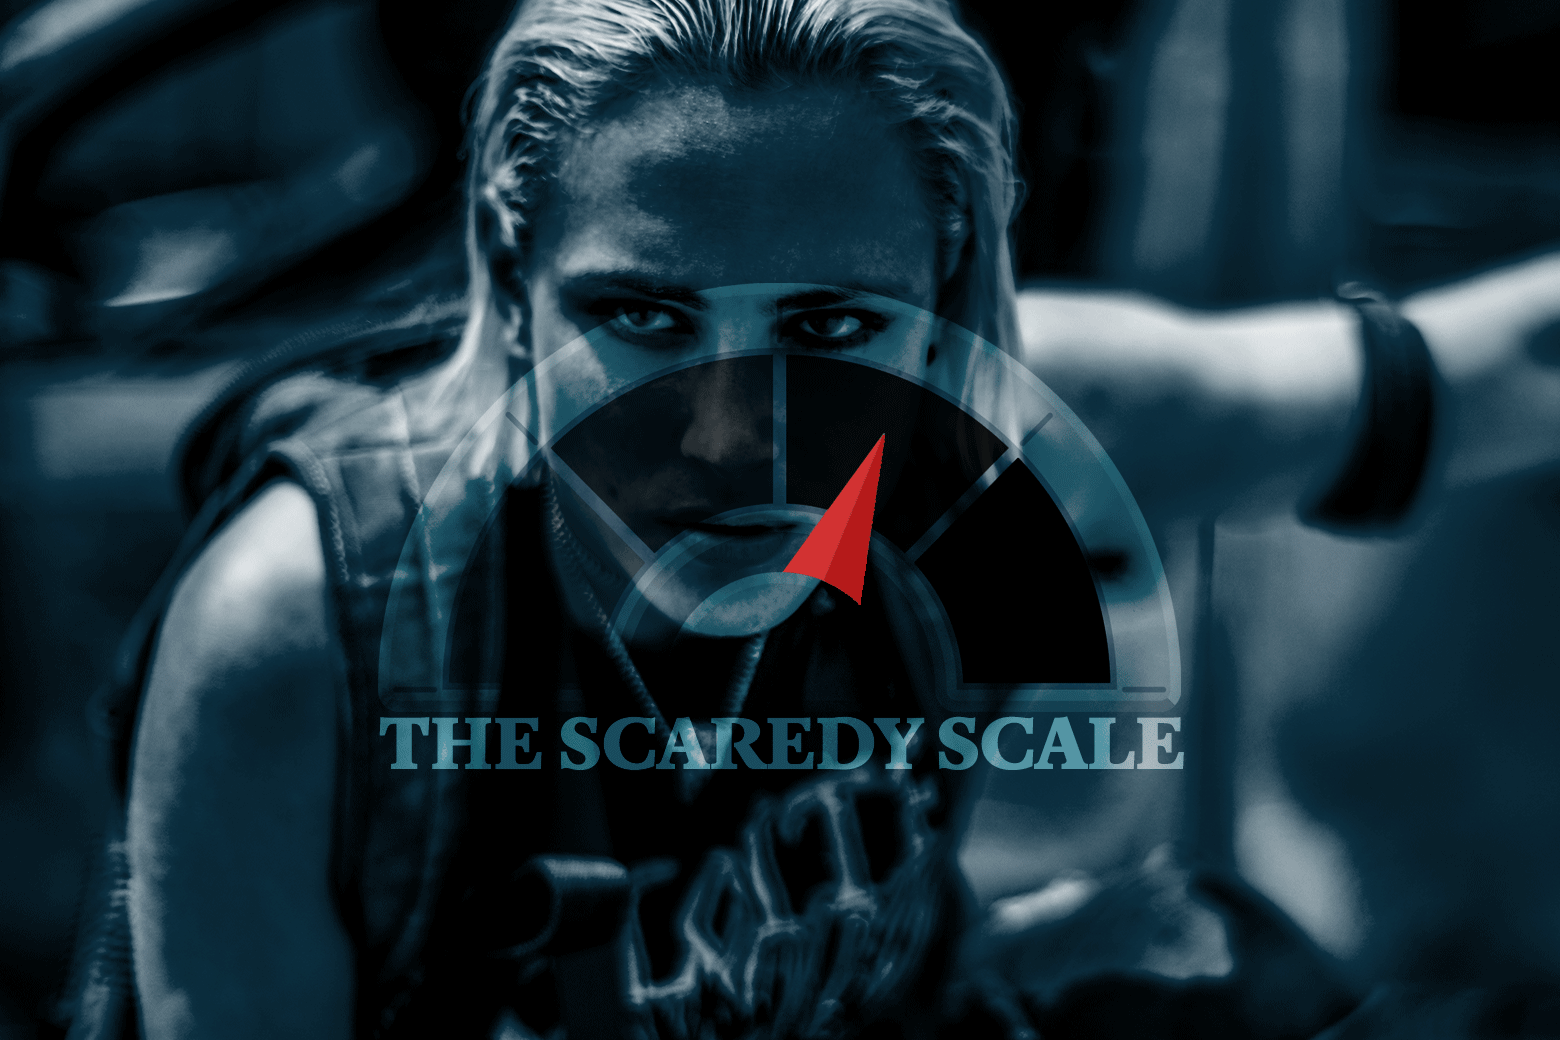 In front of Nora Arnezeder is a meter labeled "The Scaredy Scale."